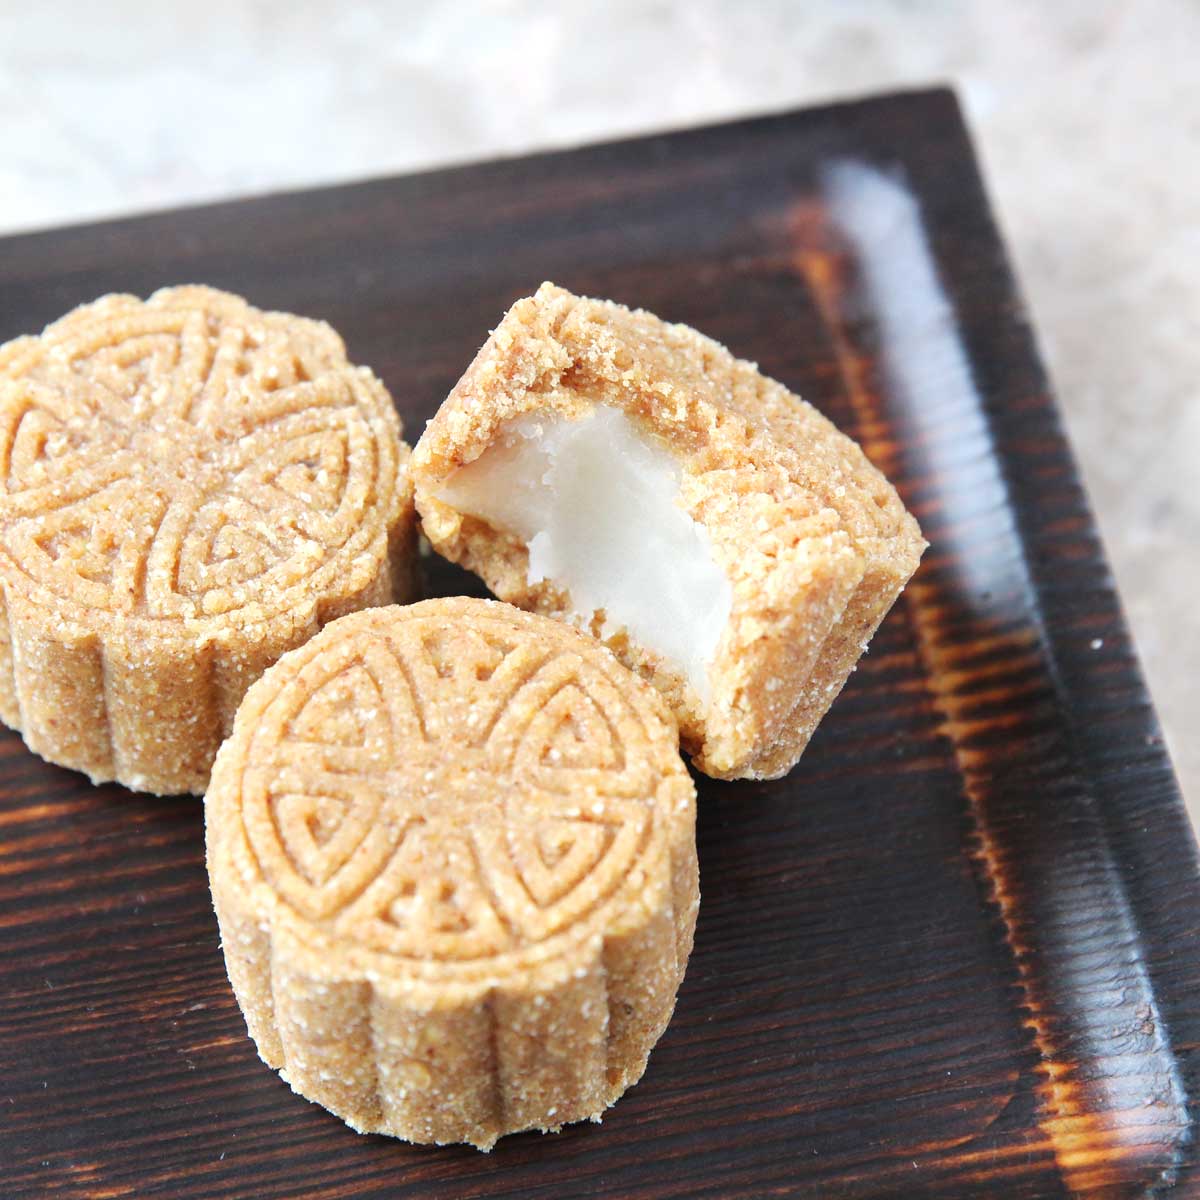 How to Make Chickpea Mooncakes (Vegan, Gluten-Free, High in Protein) - PB Fit Nice Cream